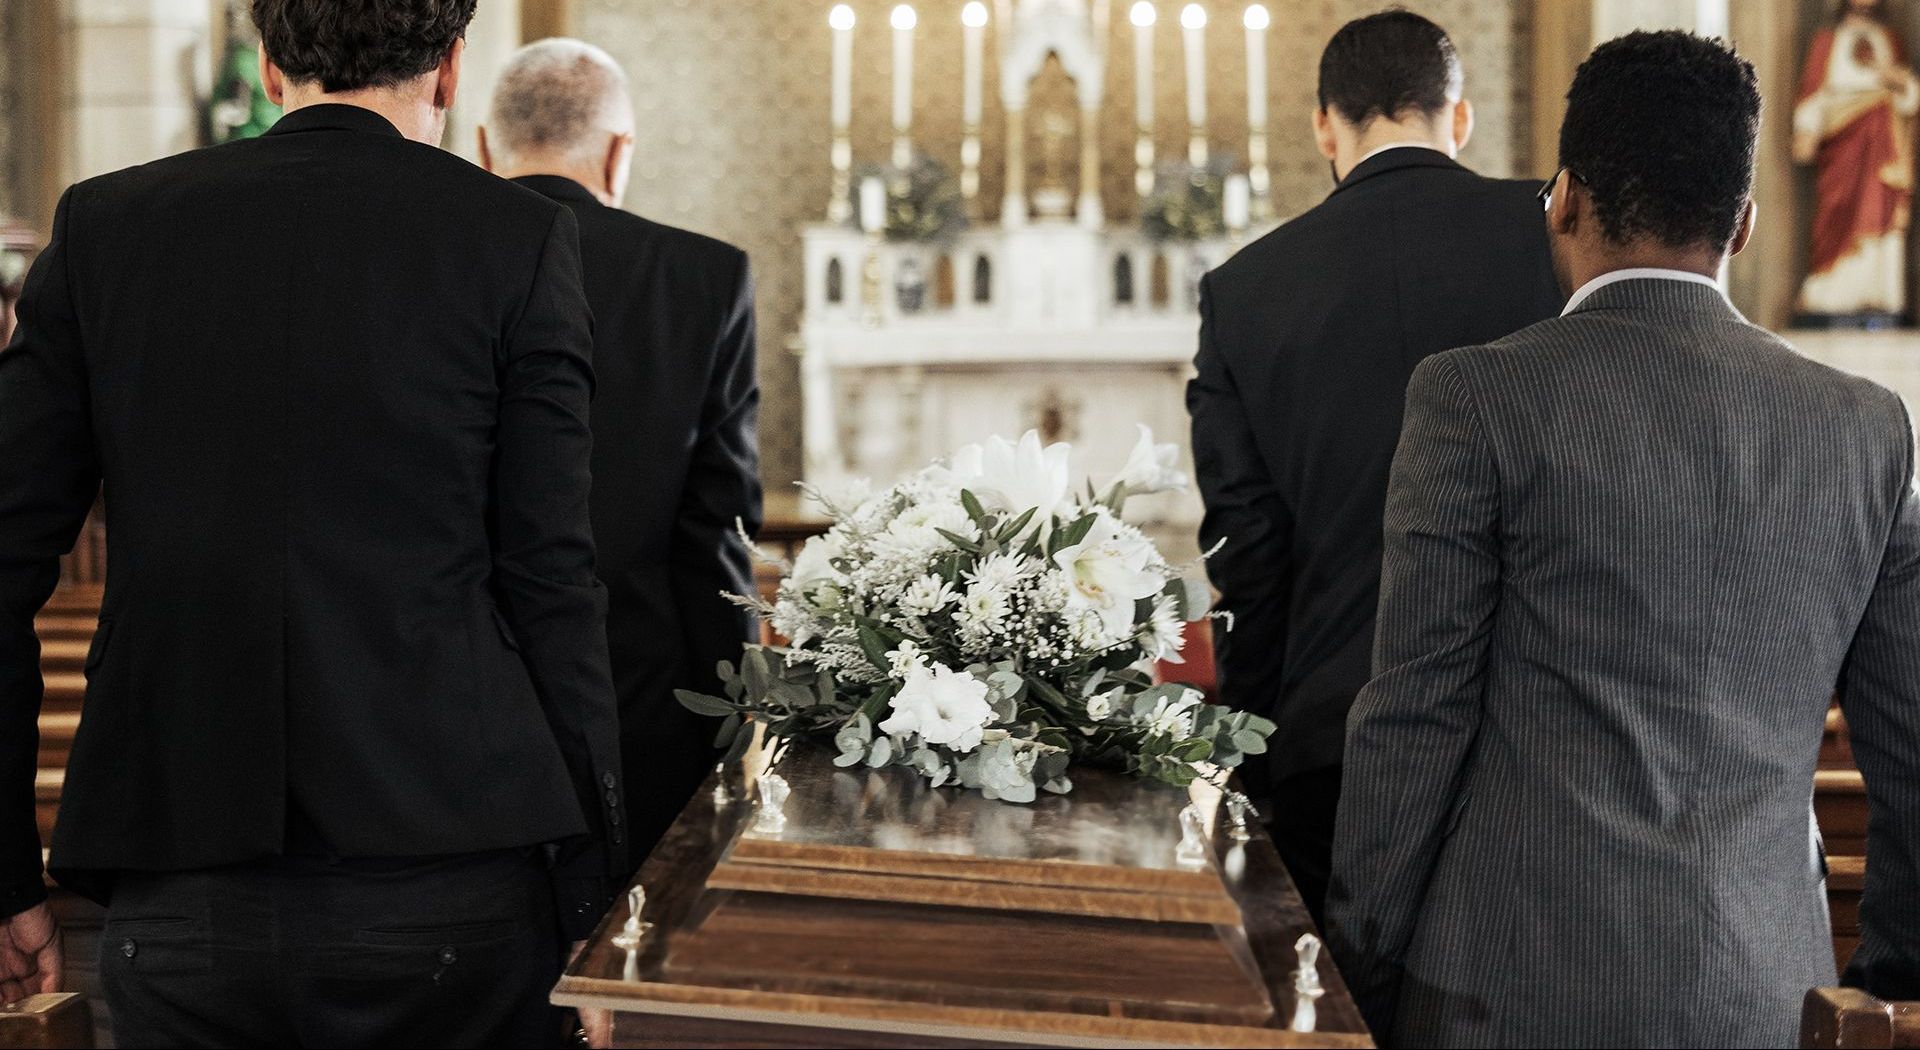 A group of men in suits are carrying a coffin in a church.